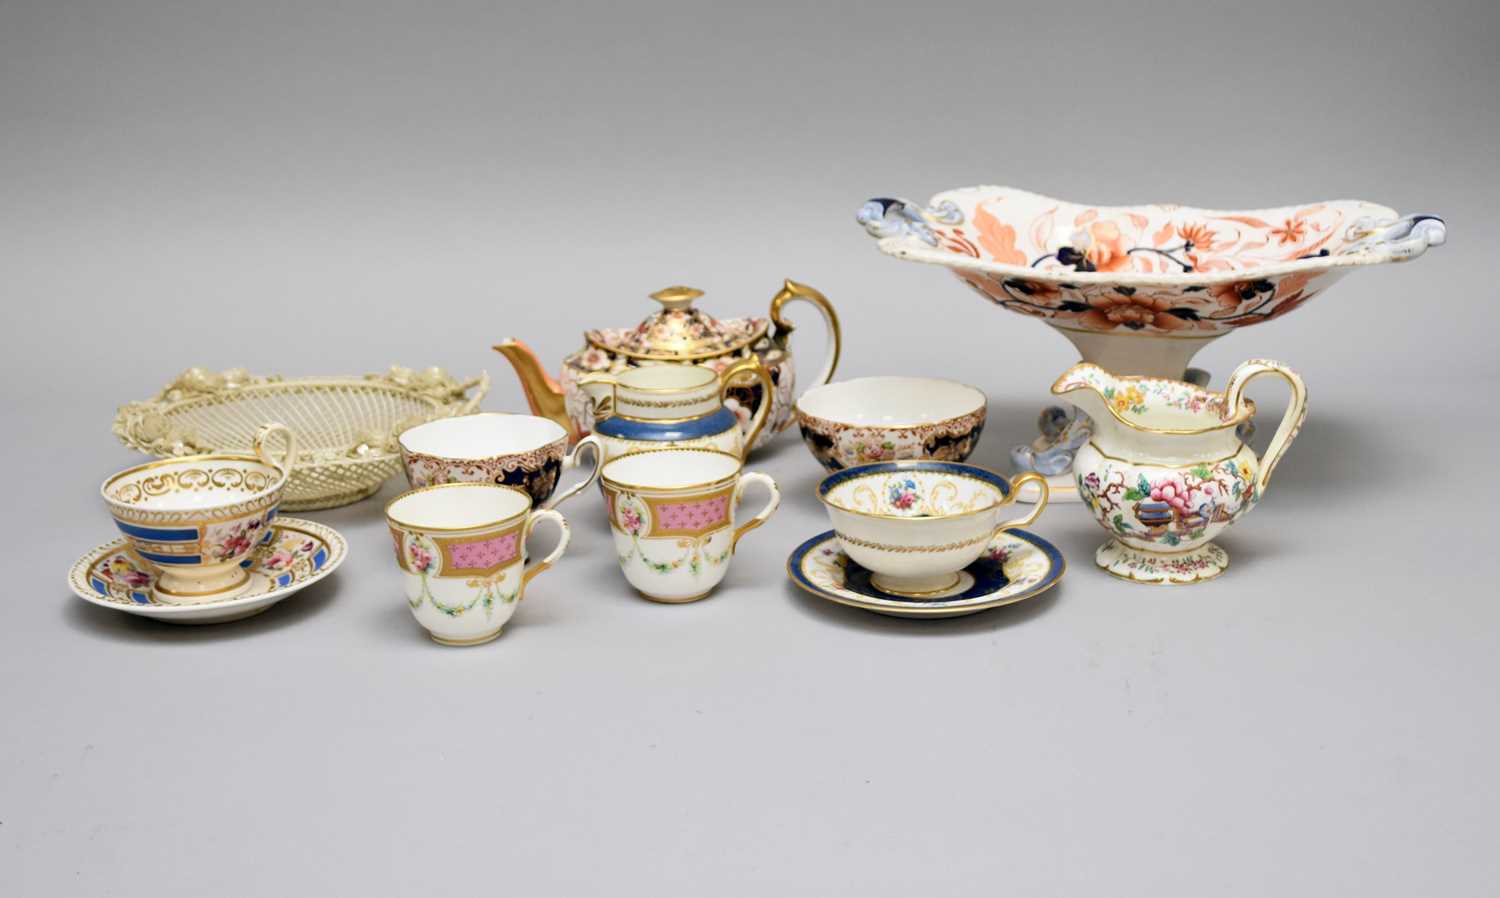 A collection of English porcelain and pottery